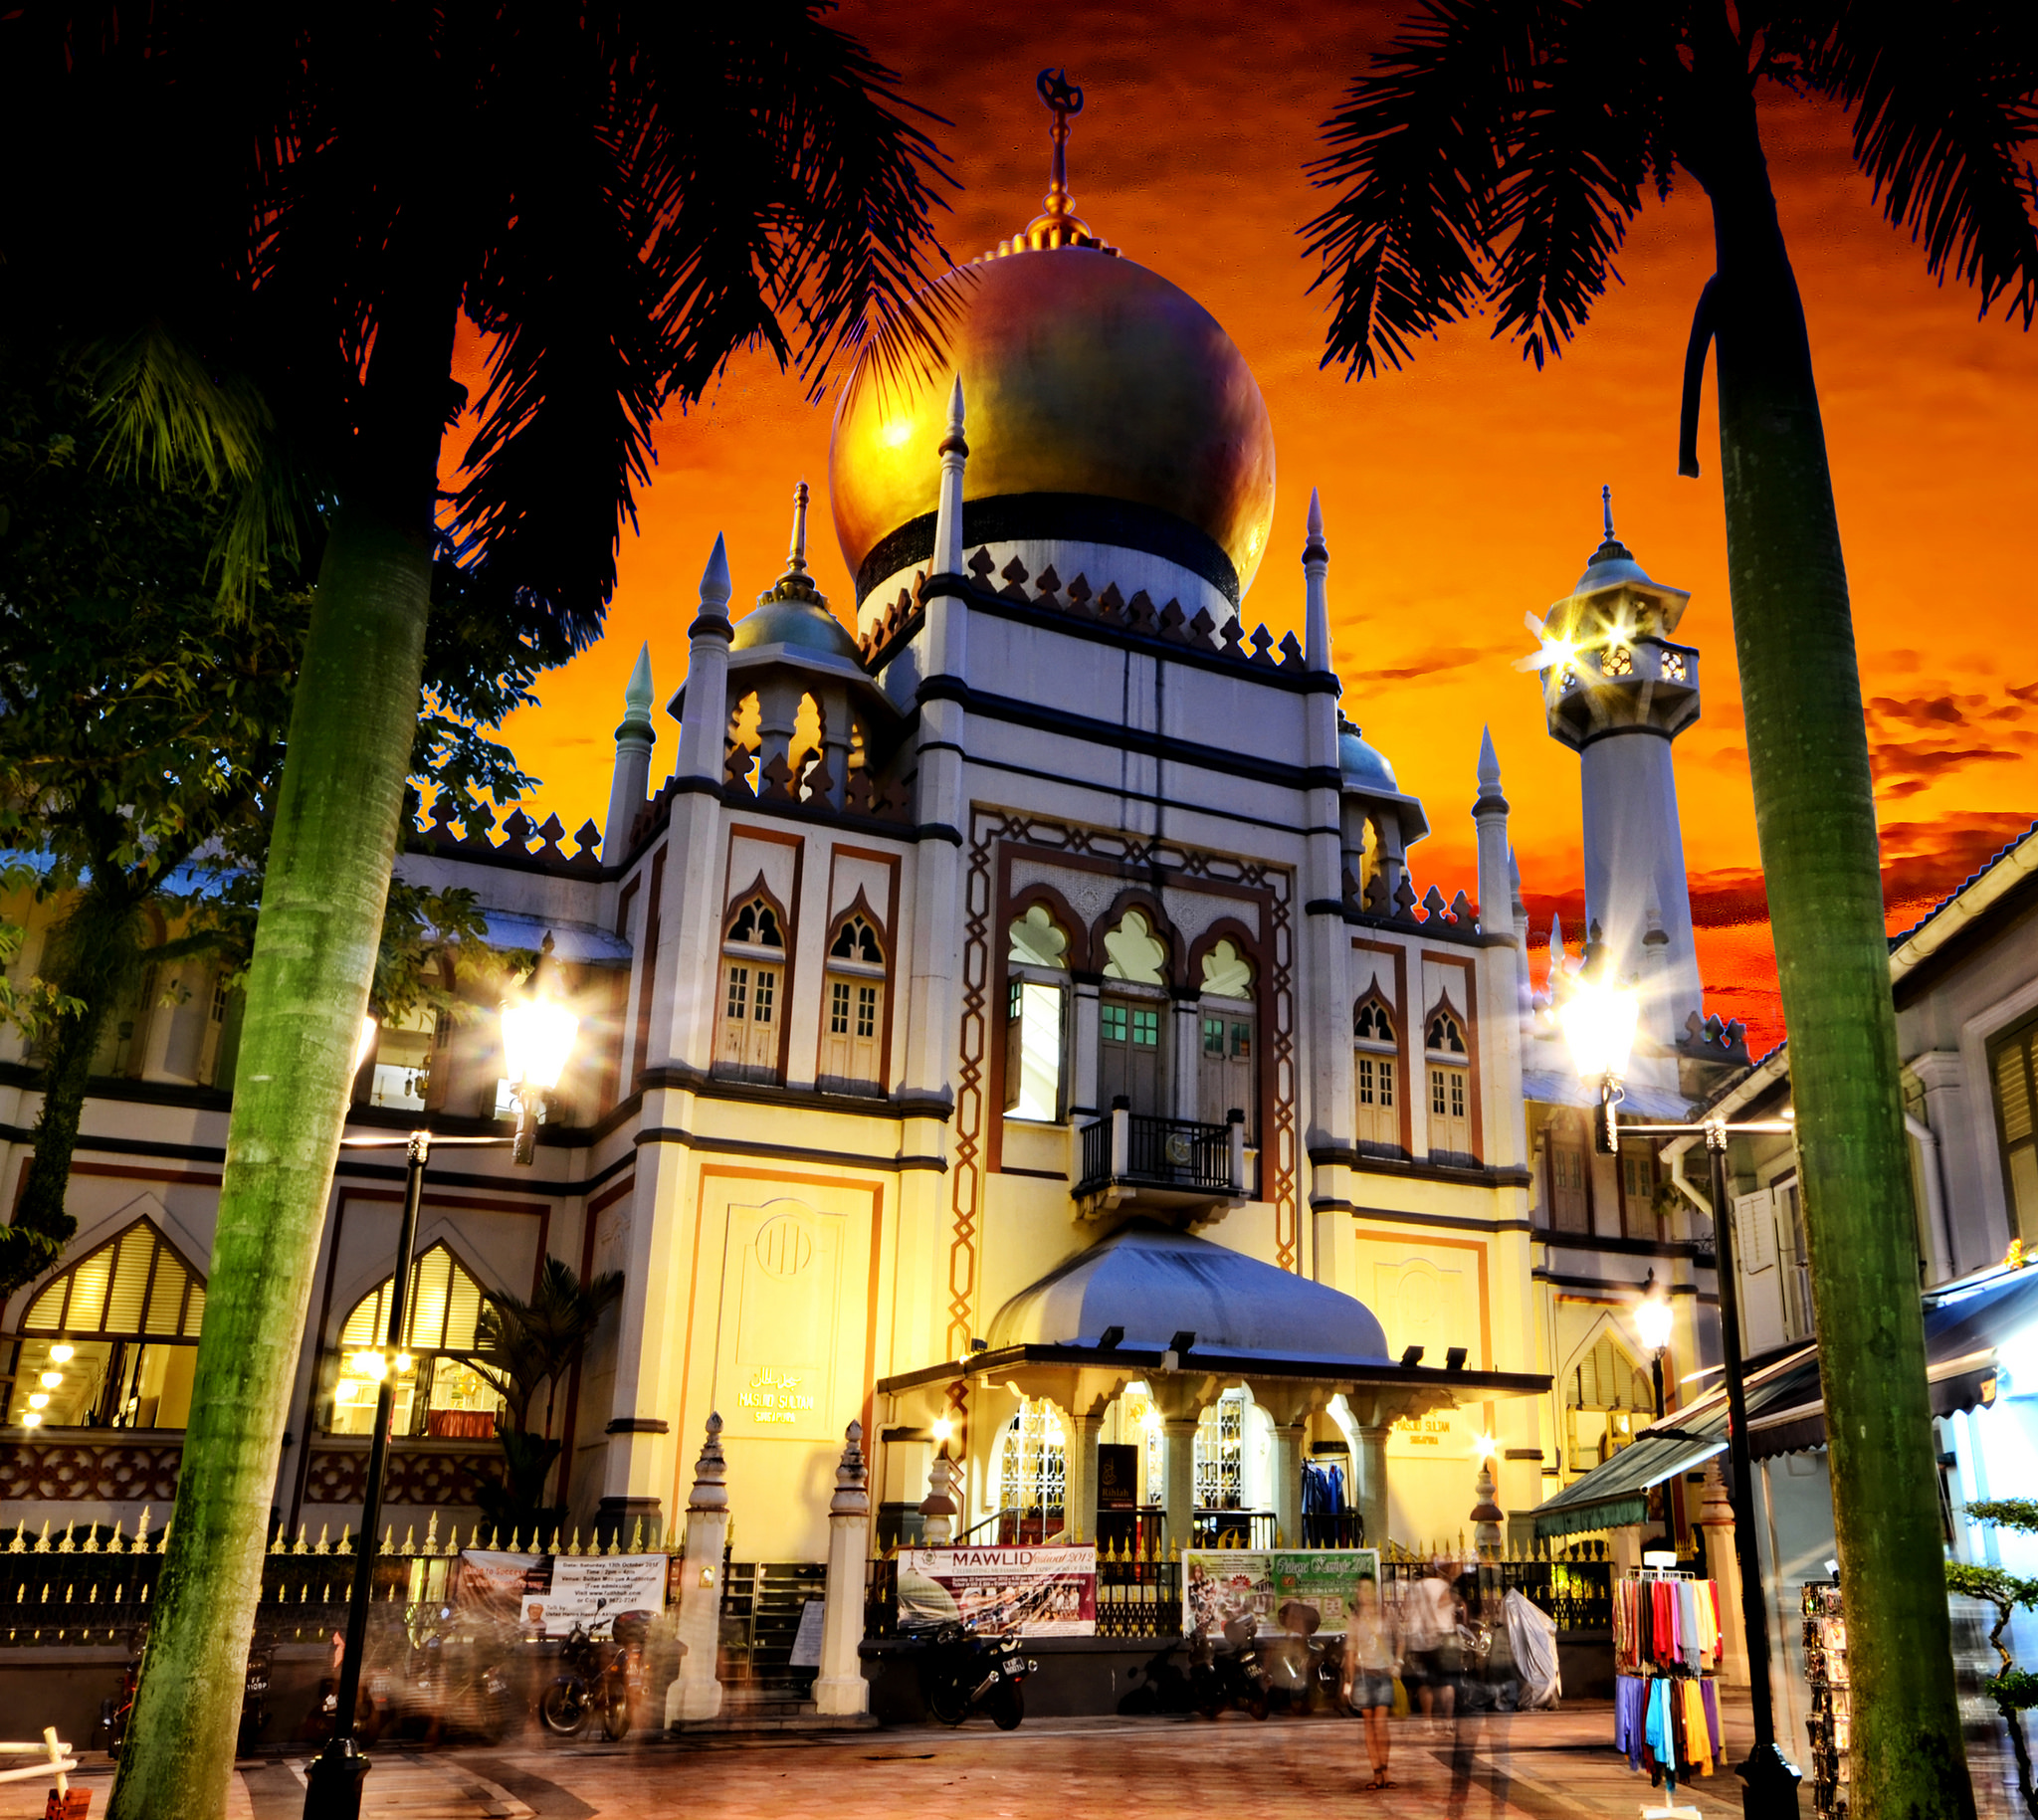 Masjid Sultan - Mosque in Singapore - Thousand Wonders